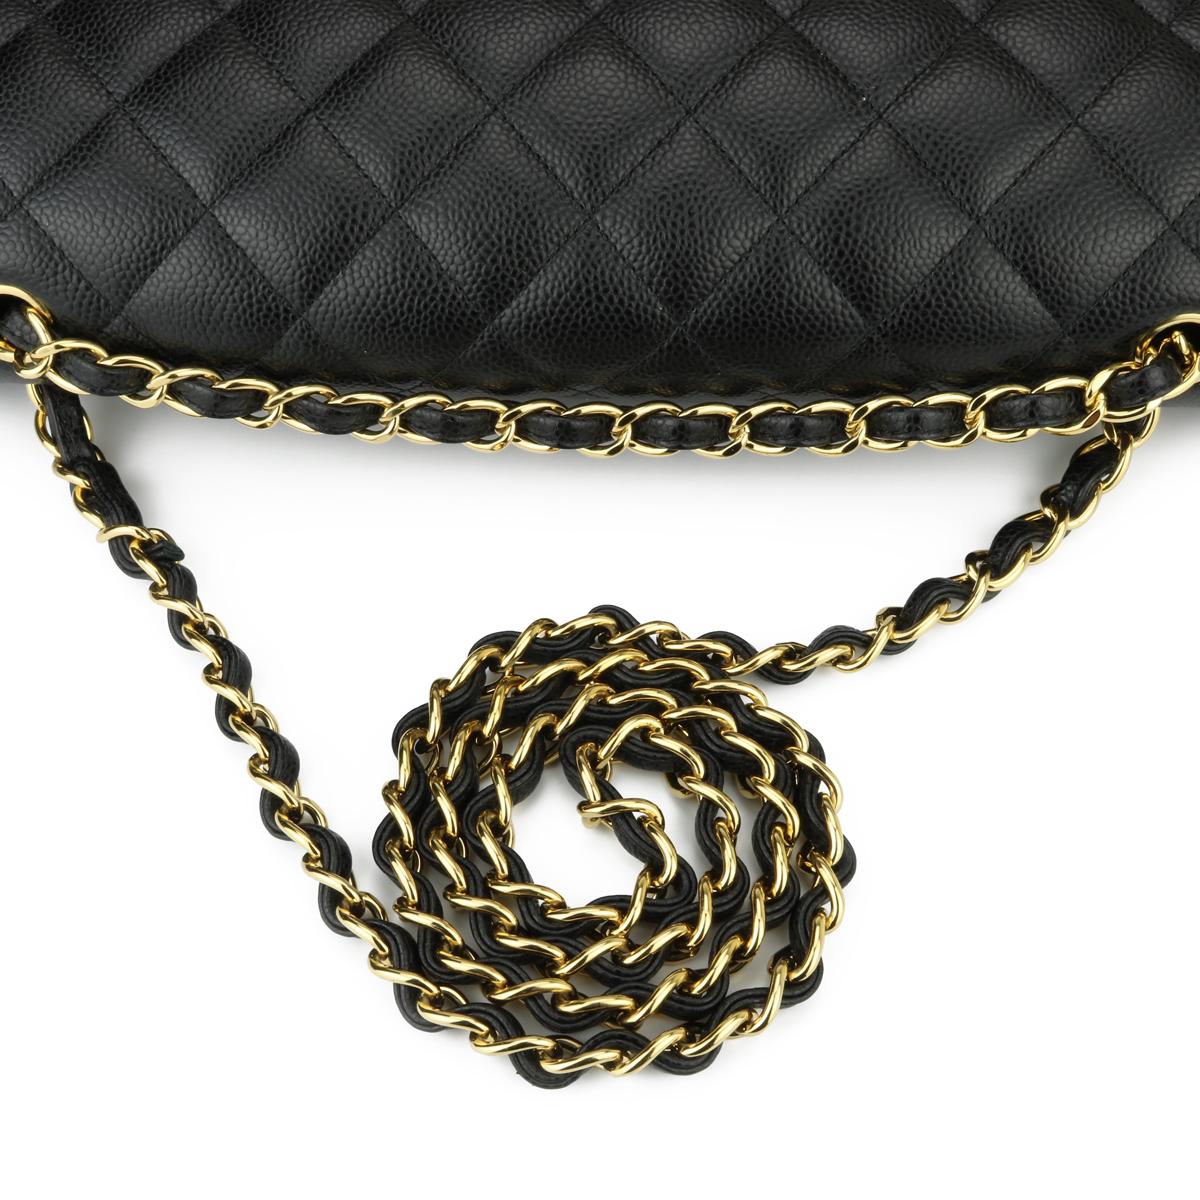 CHANEL Double Flap Maxi Bag Black Caviar with Gold Hardware 2018 6